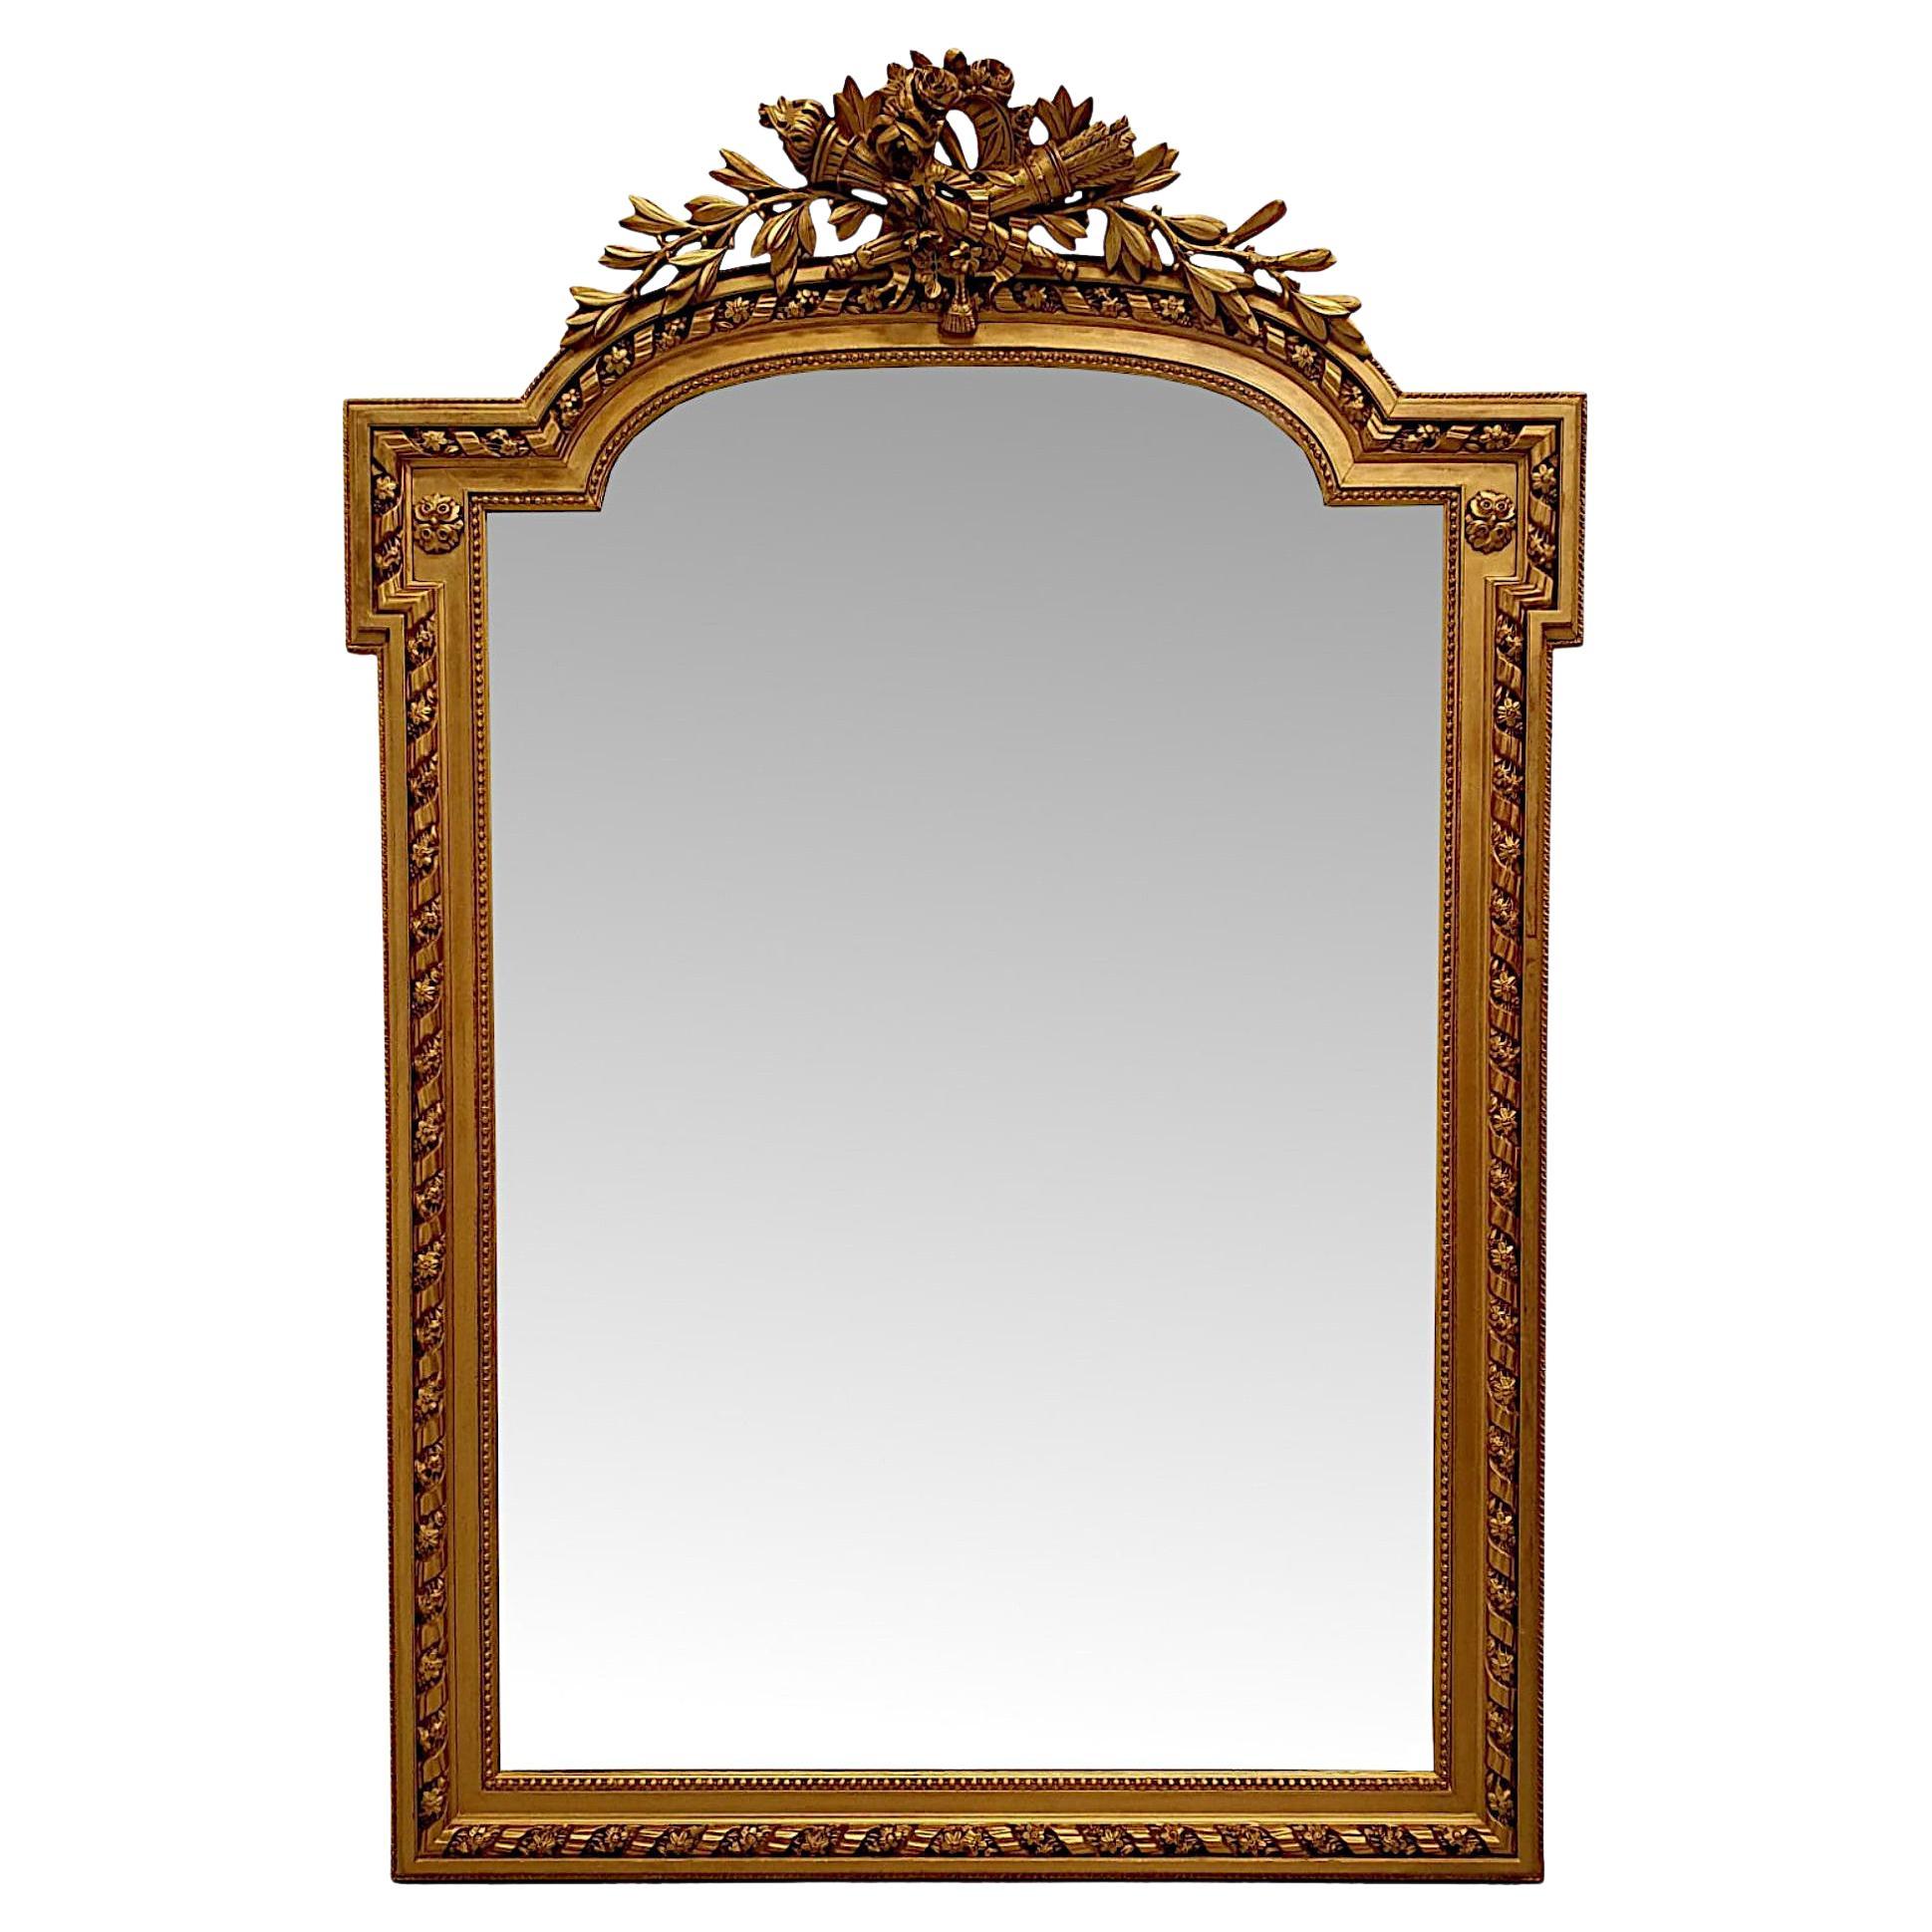  A Gorgeous 19th Century Gilt Finish Hall or Overmantle Mirror